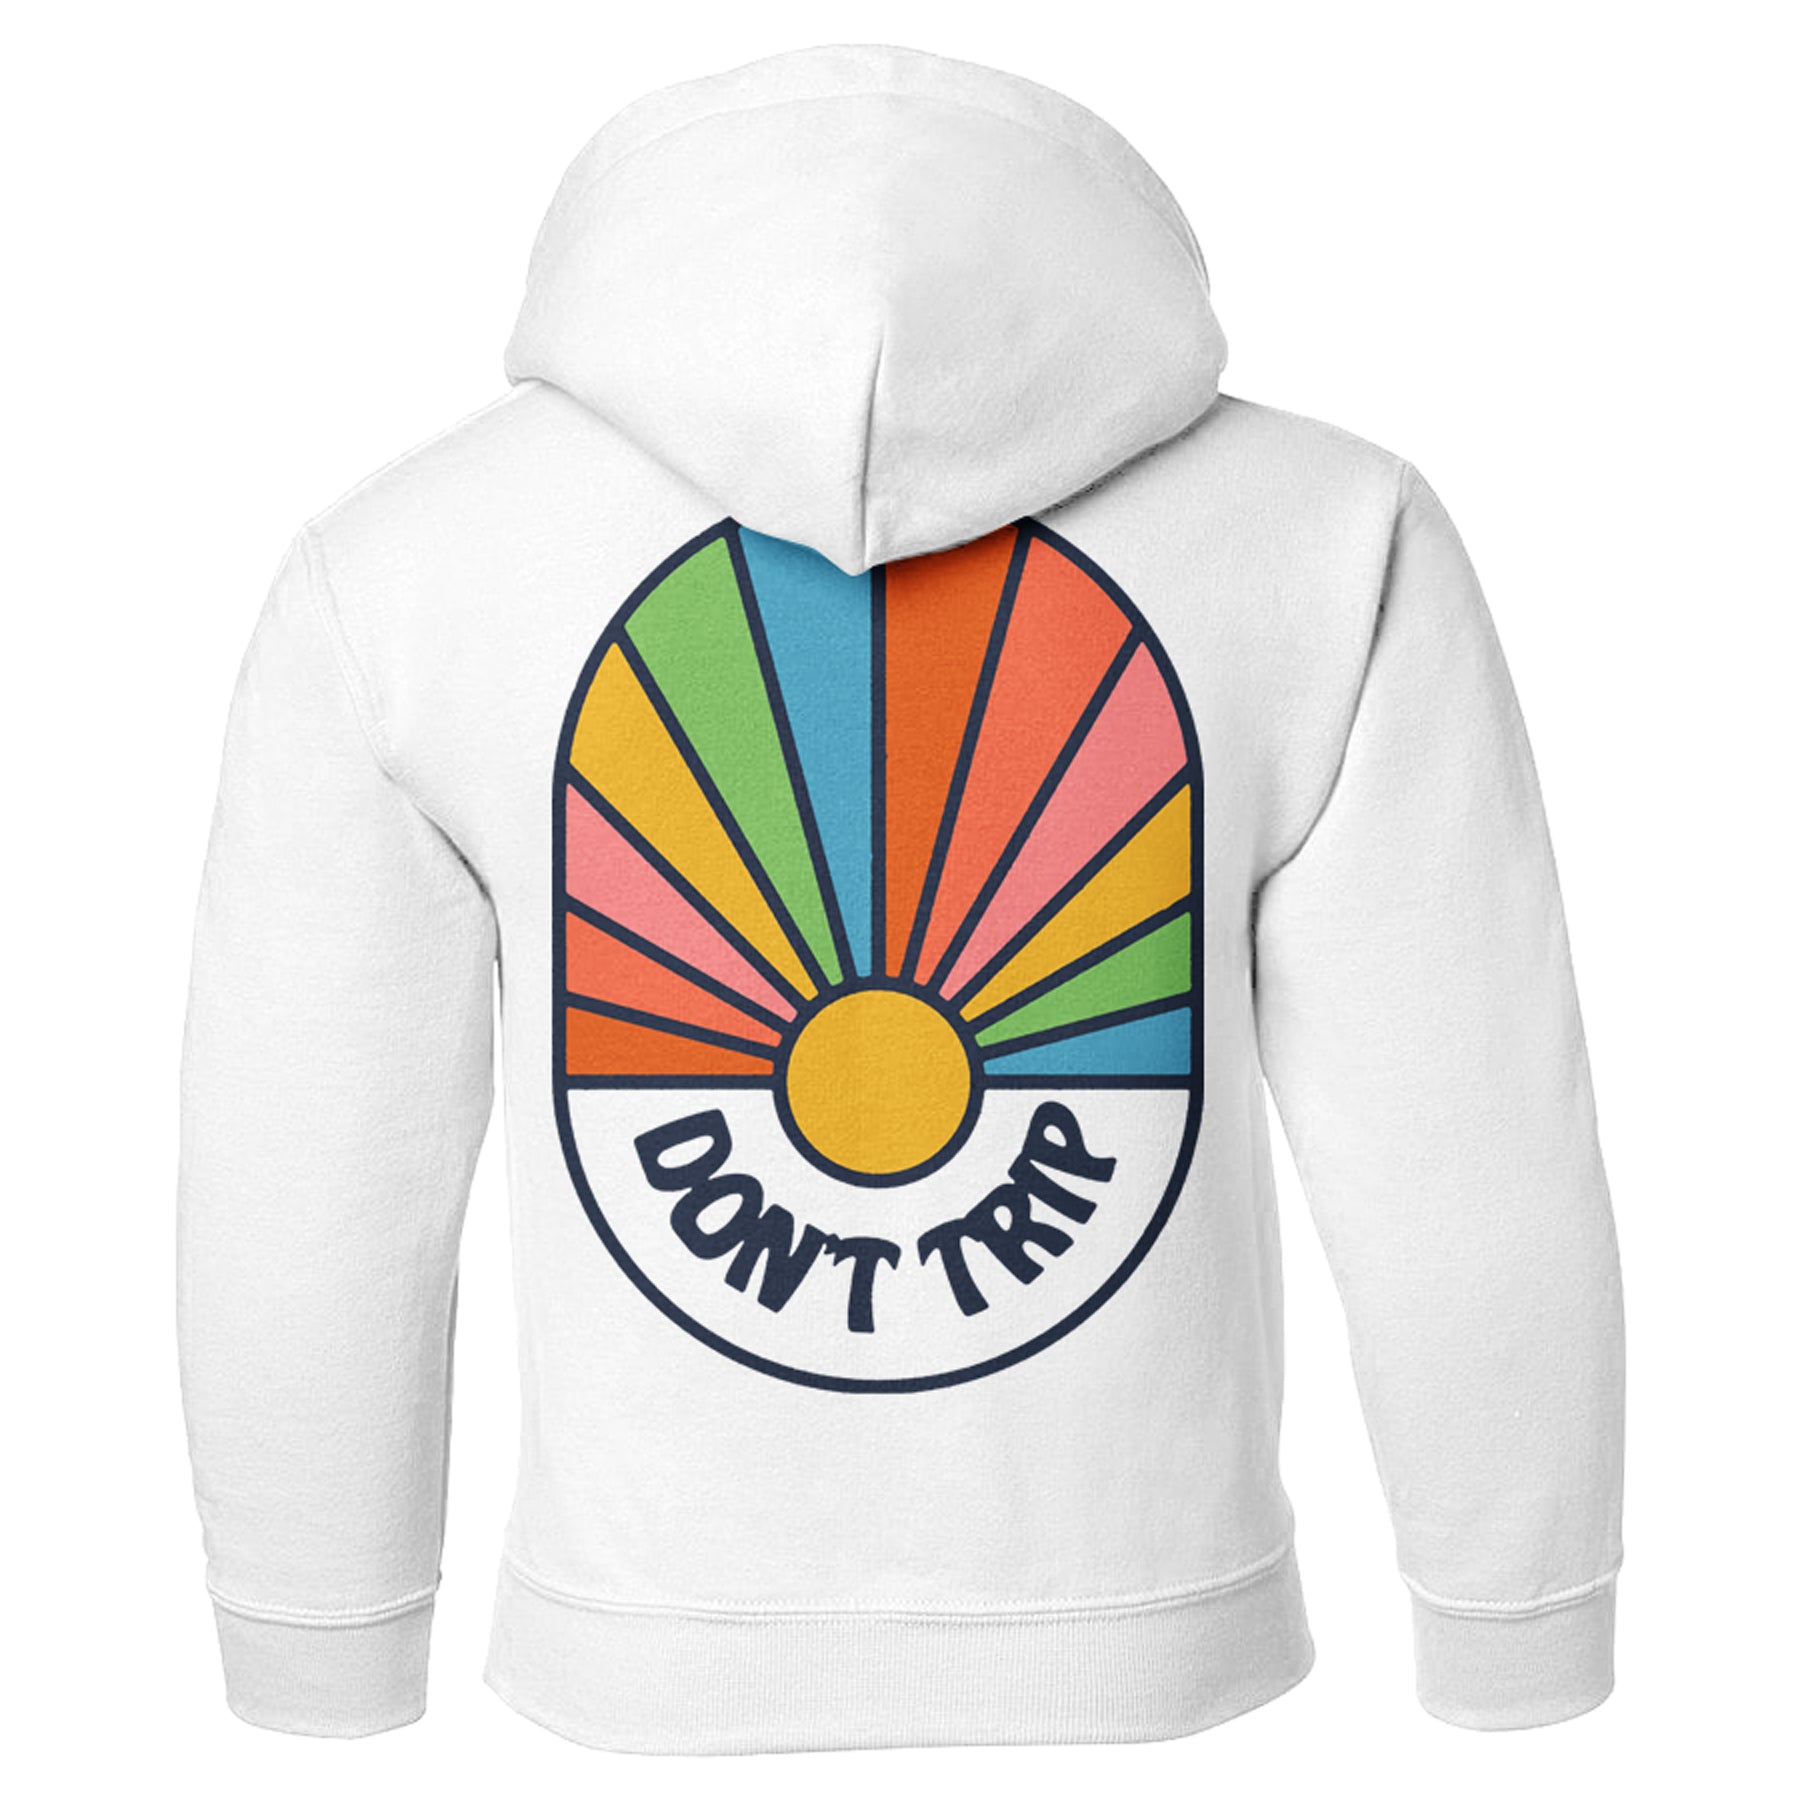 Spectrum Kids Hoodie in white with Don't Trip rainbow spectrum on back on white background - Free & Easy